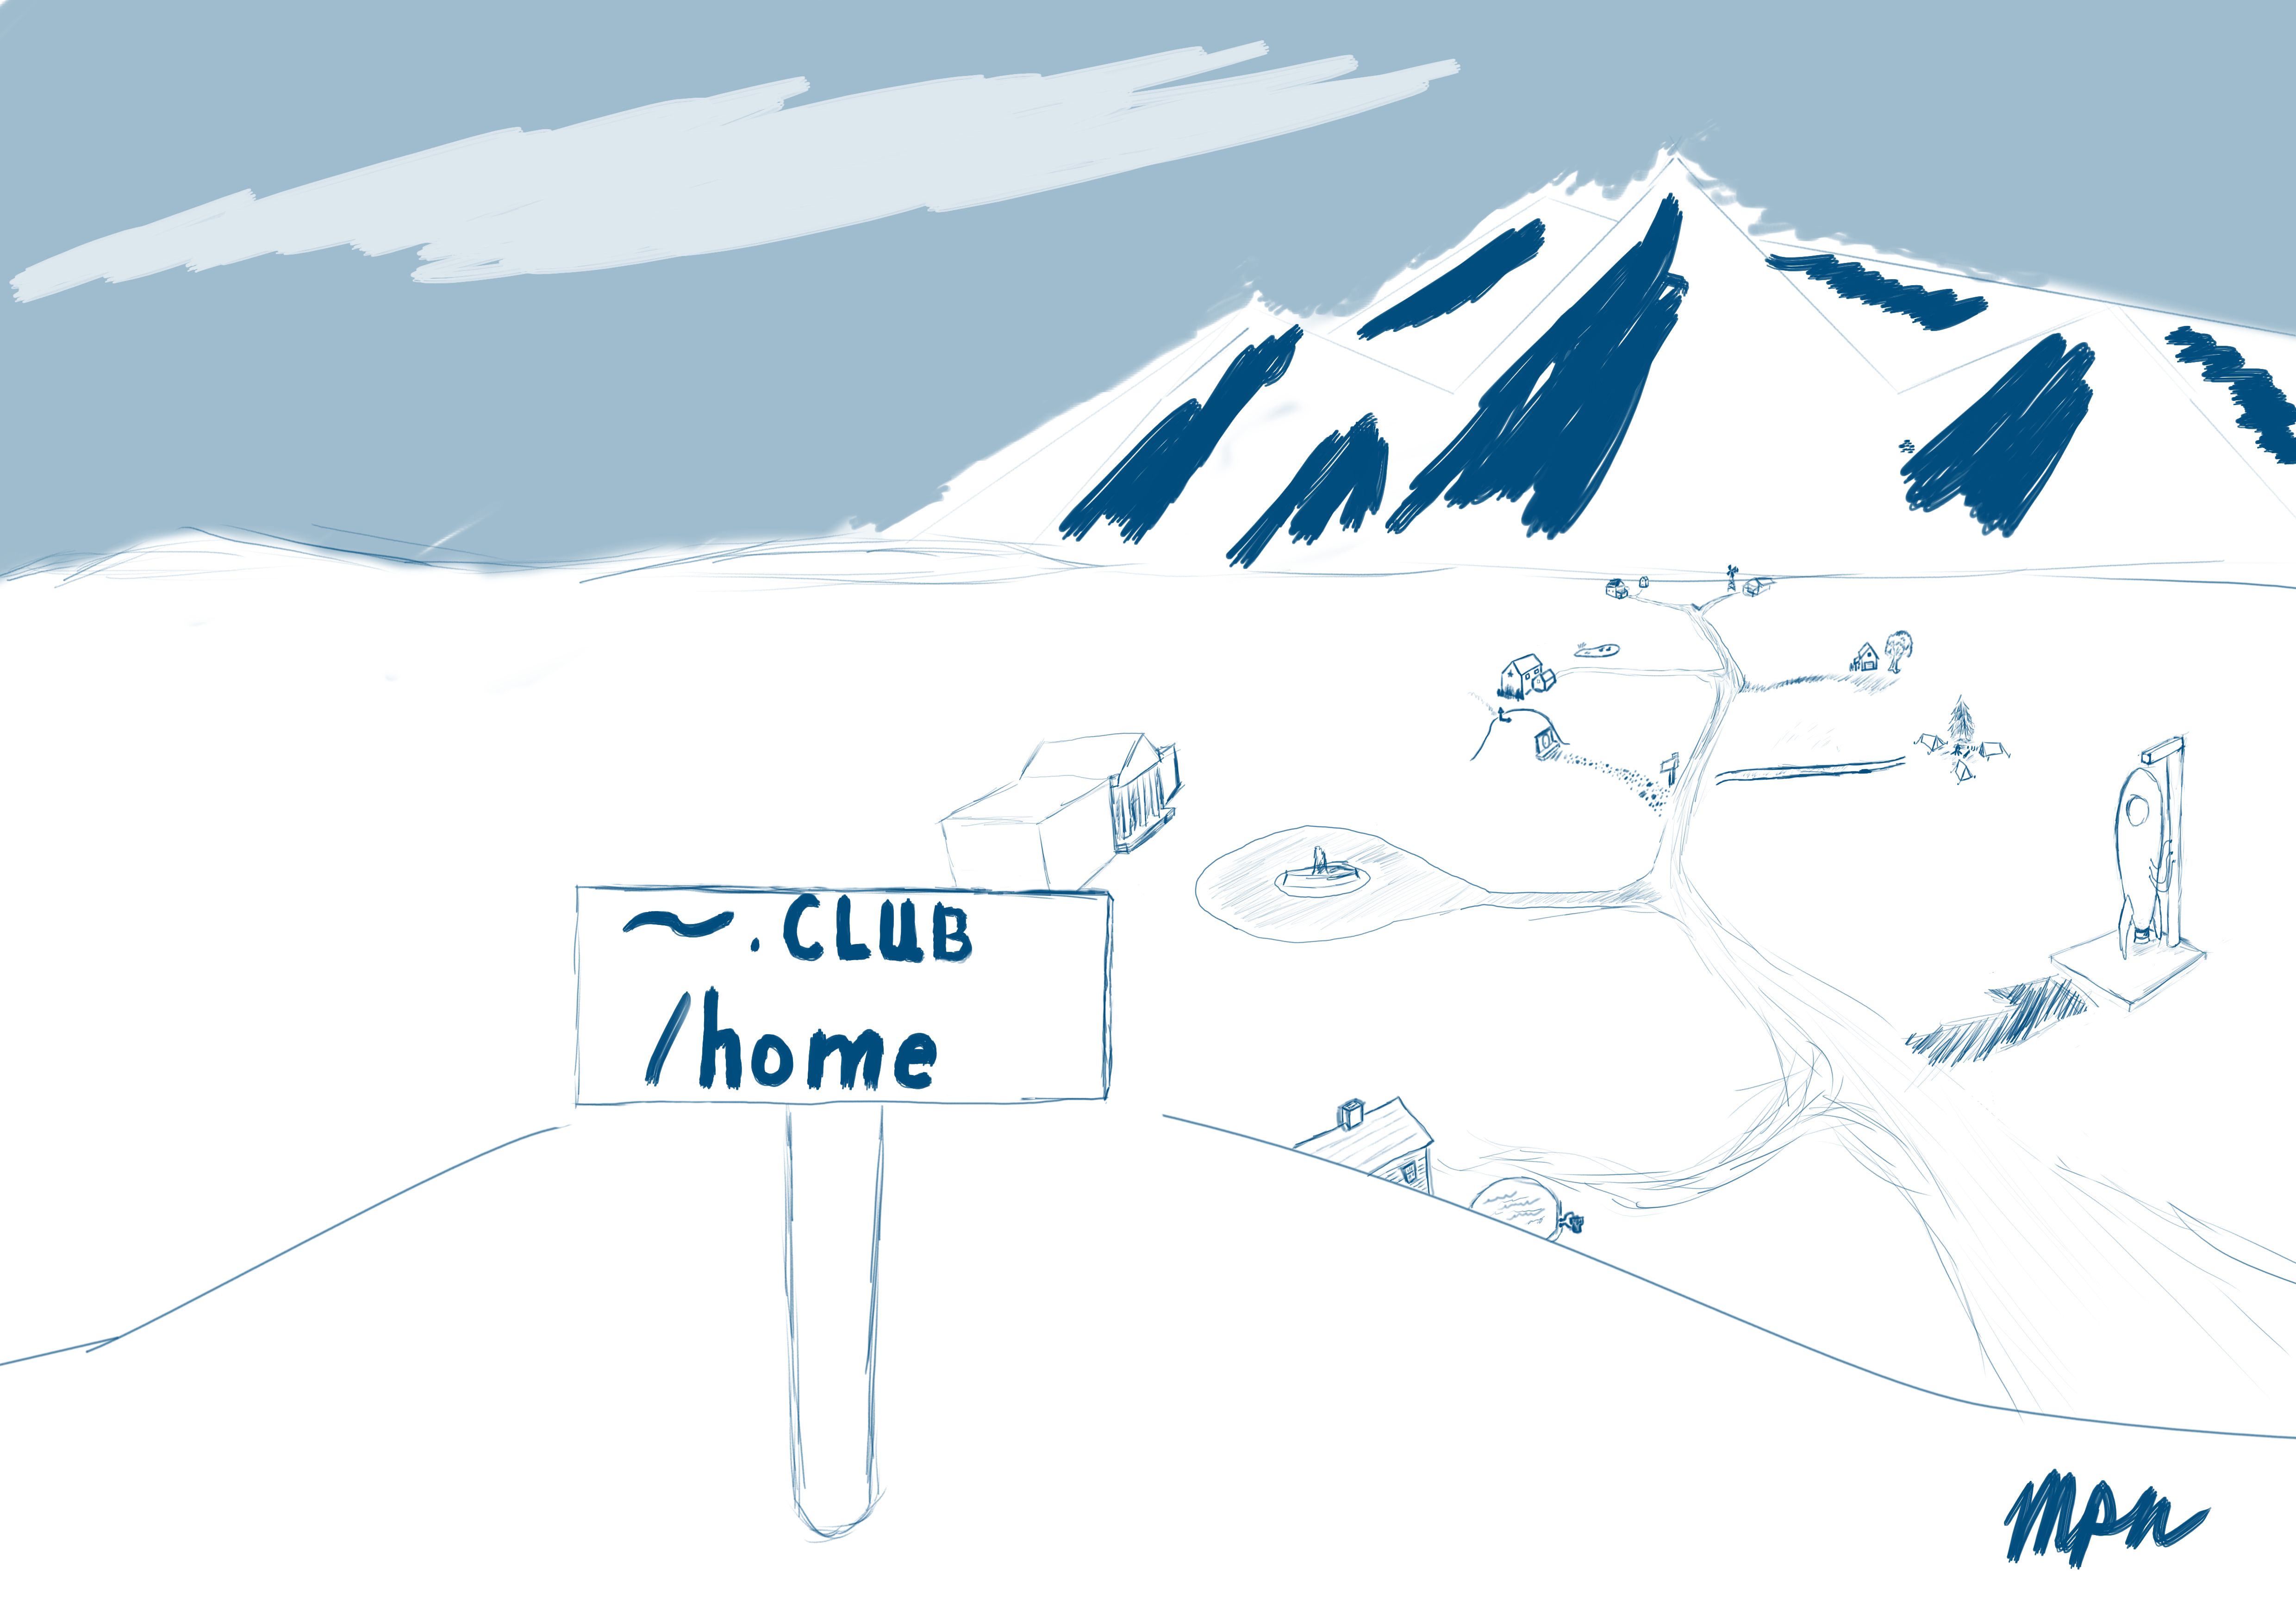 A sign in the foreground with '~.club /home' written on it standing on a hill overlooking a road with different unique houses in the midground and sky and mountains in the background